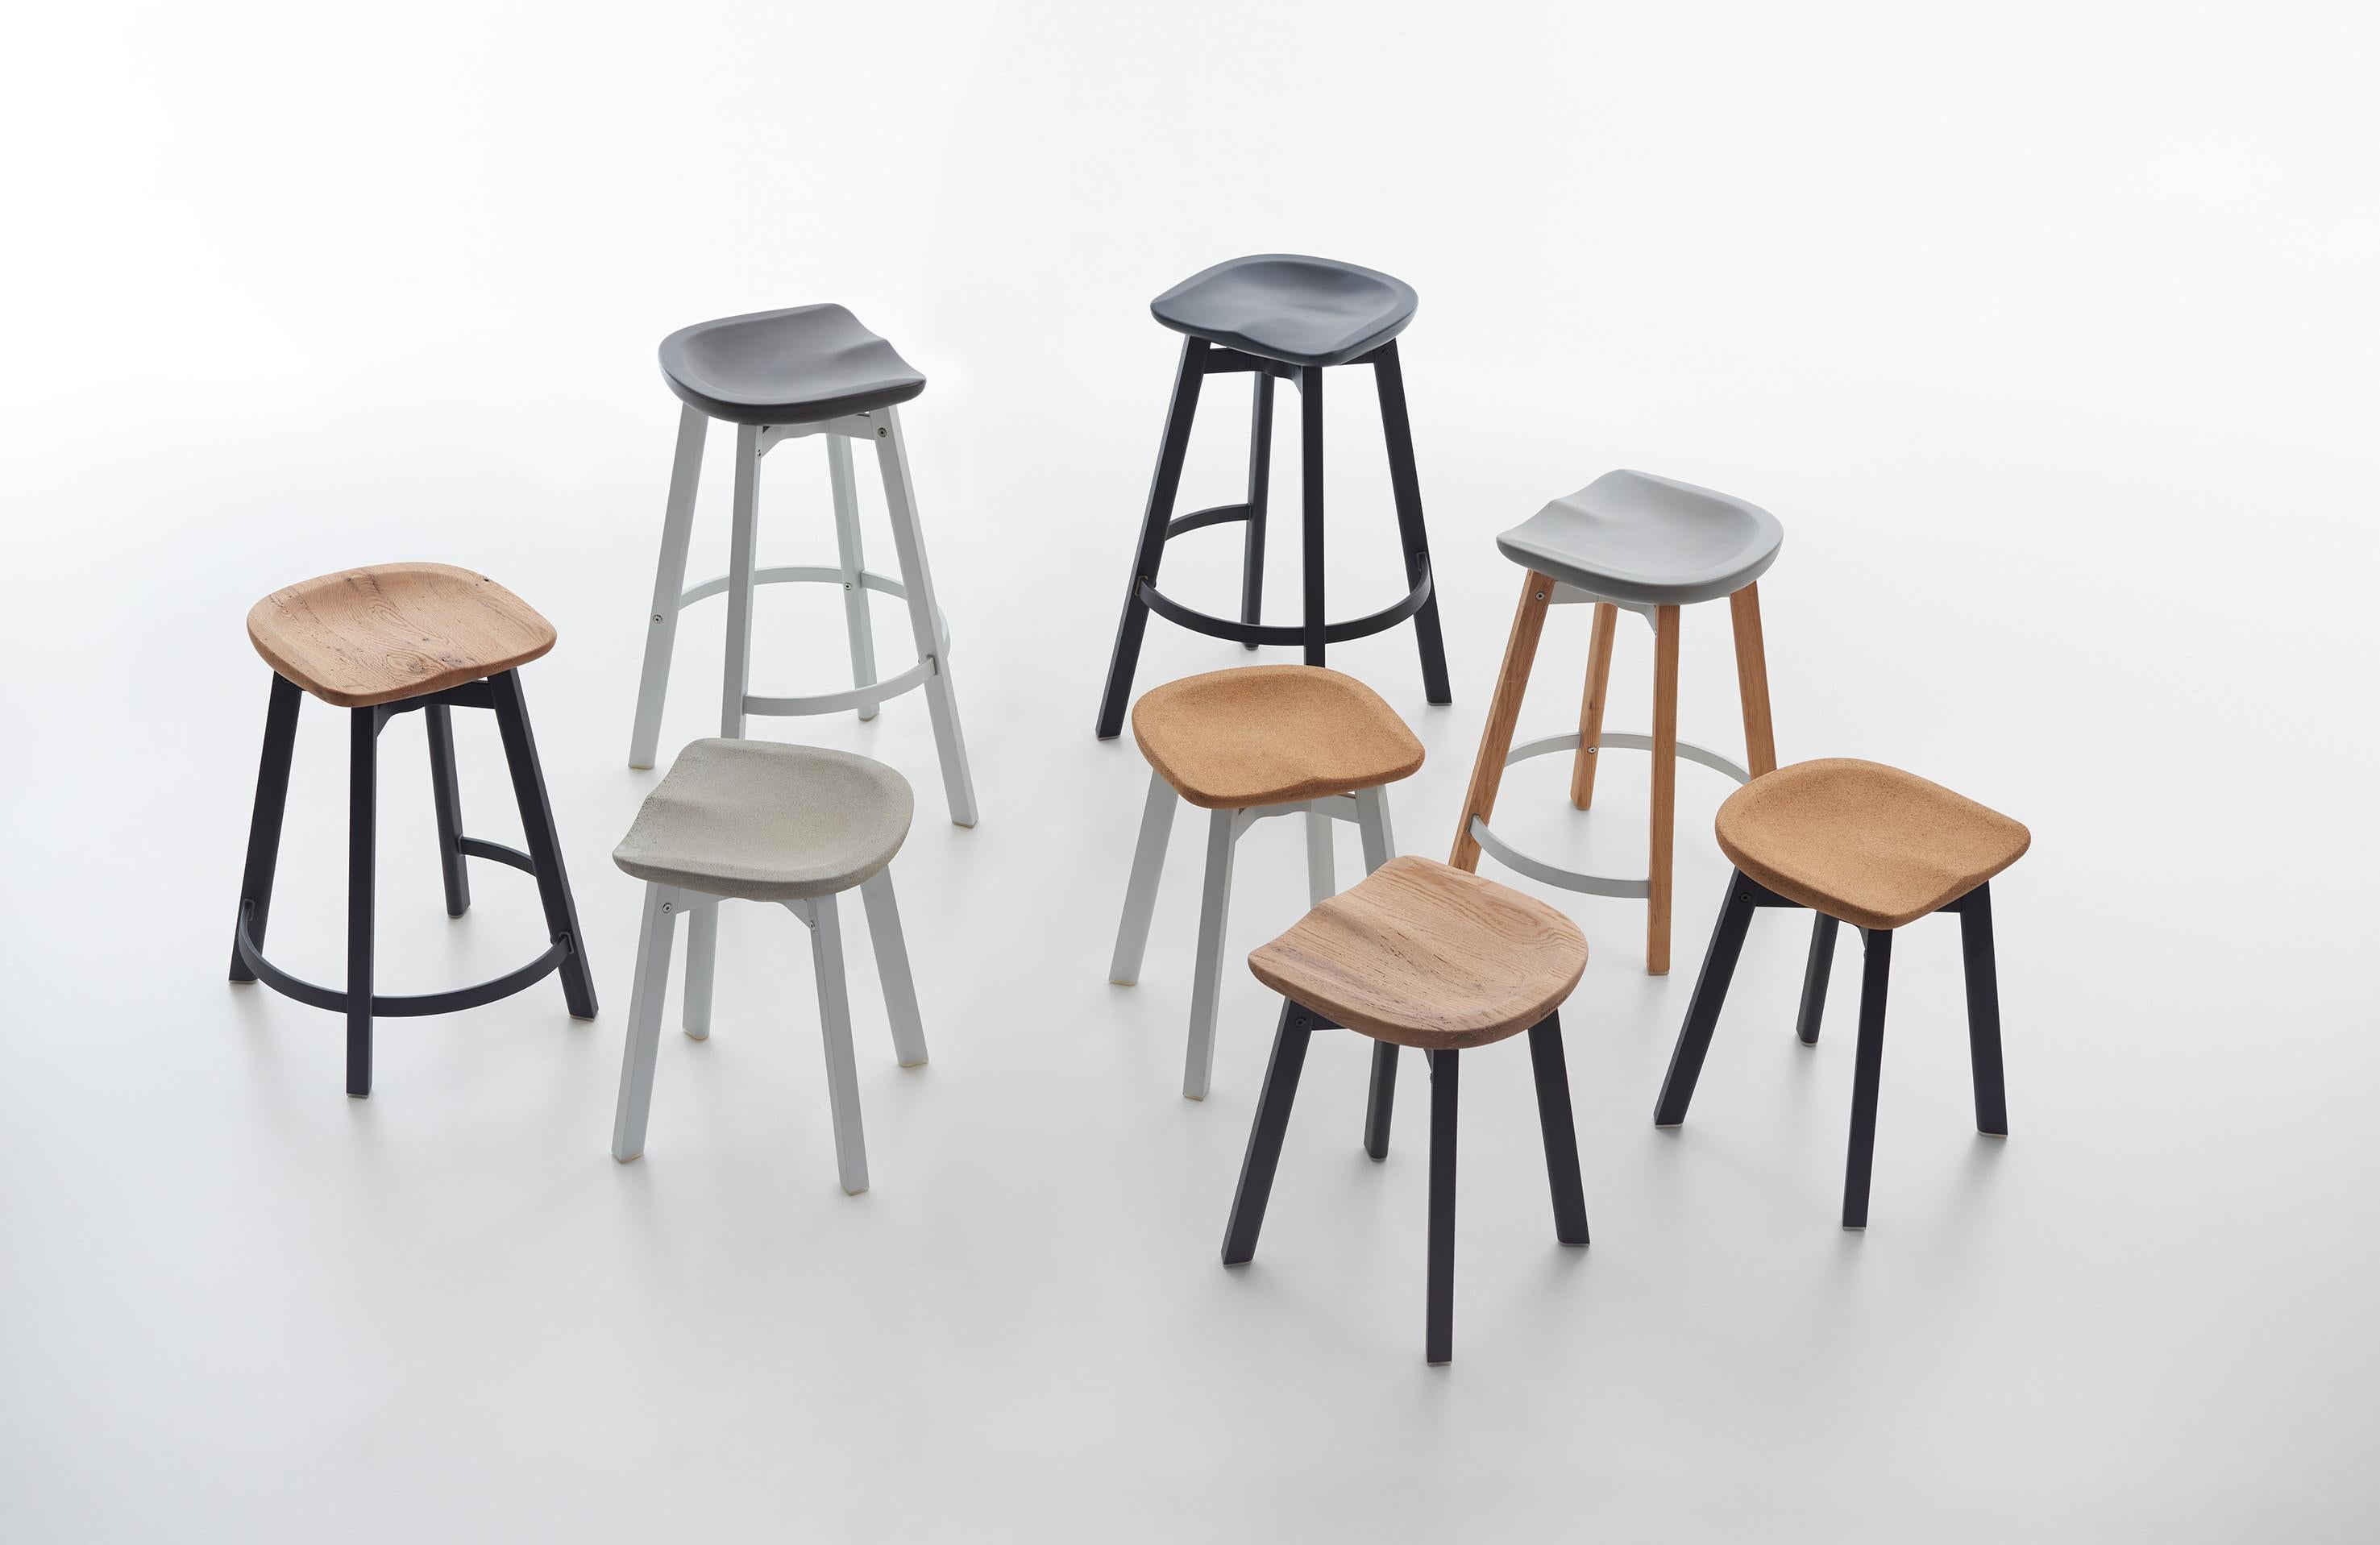 Emeco Su Counter Stool in Wood w/ Reclaimed Oak Seat by Nendo In New Condition For Sale In Hanover, PA